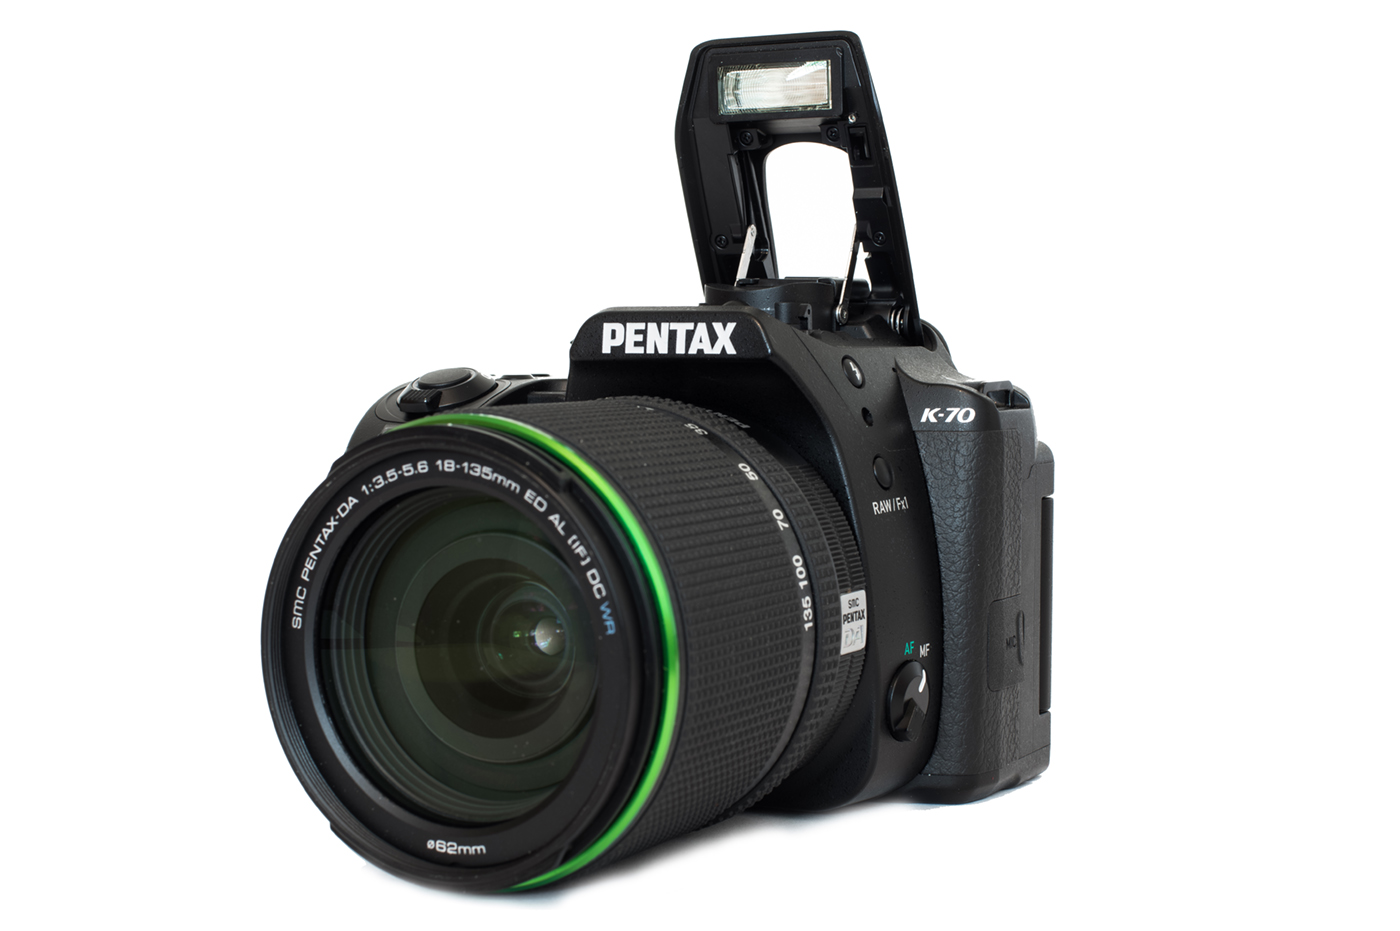 The Pentax K-70 with its flash up